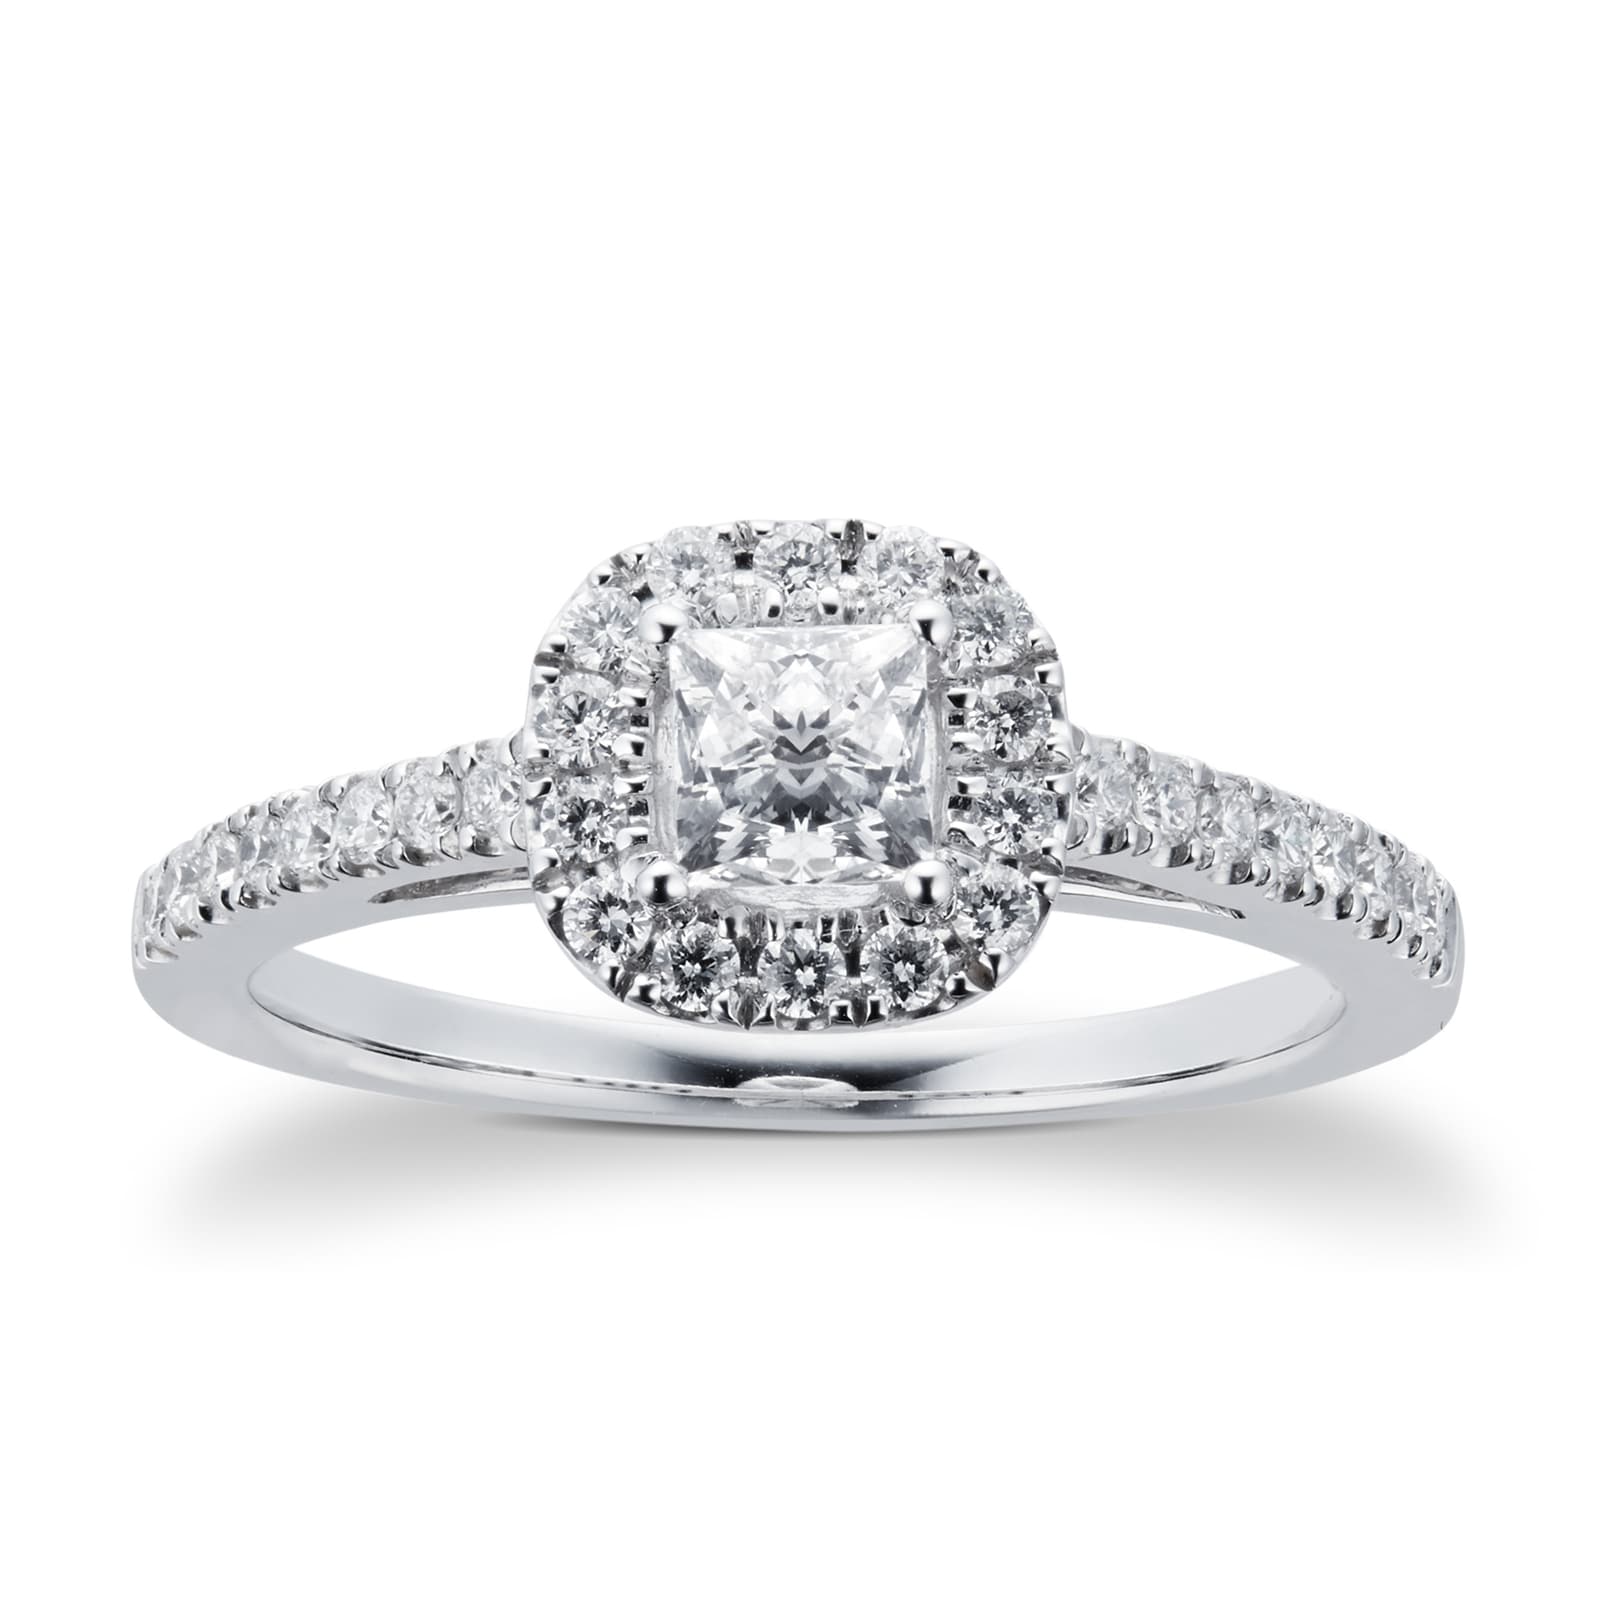 Women Classic Ring Size N O P Q Simulated Diamond Solitaire White Gold Plated UK 